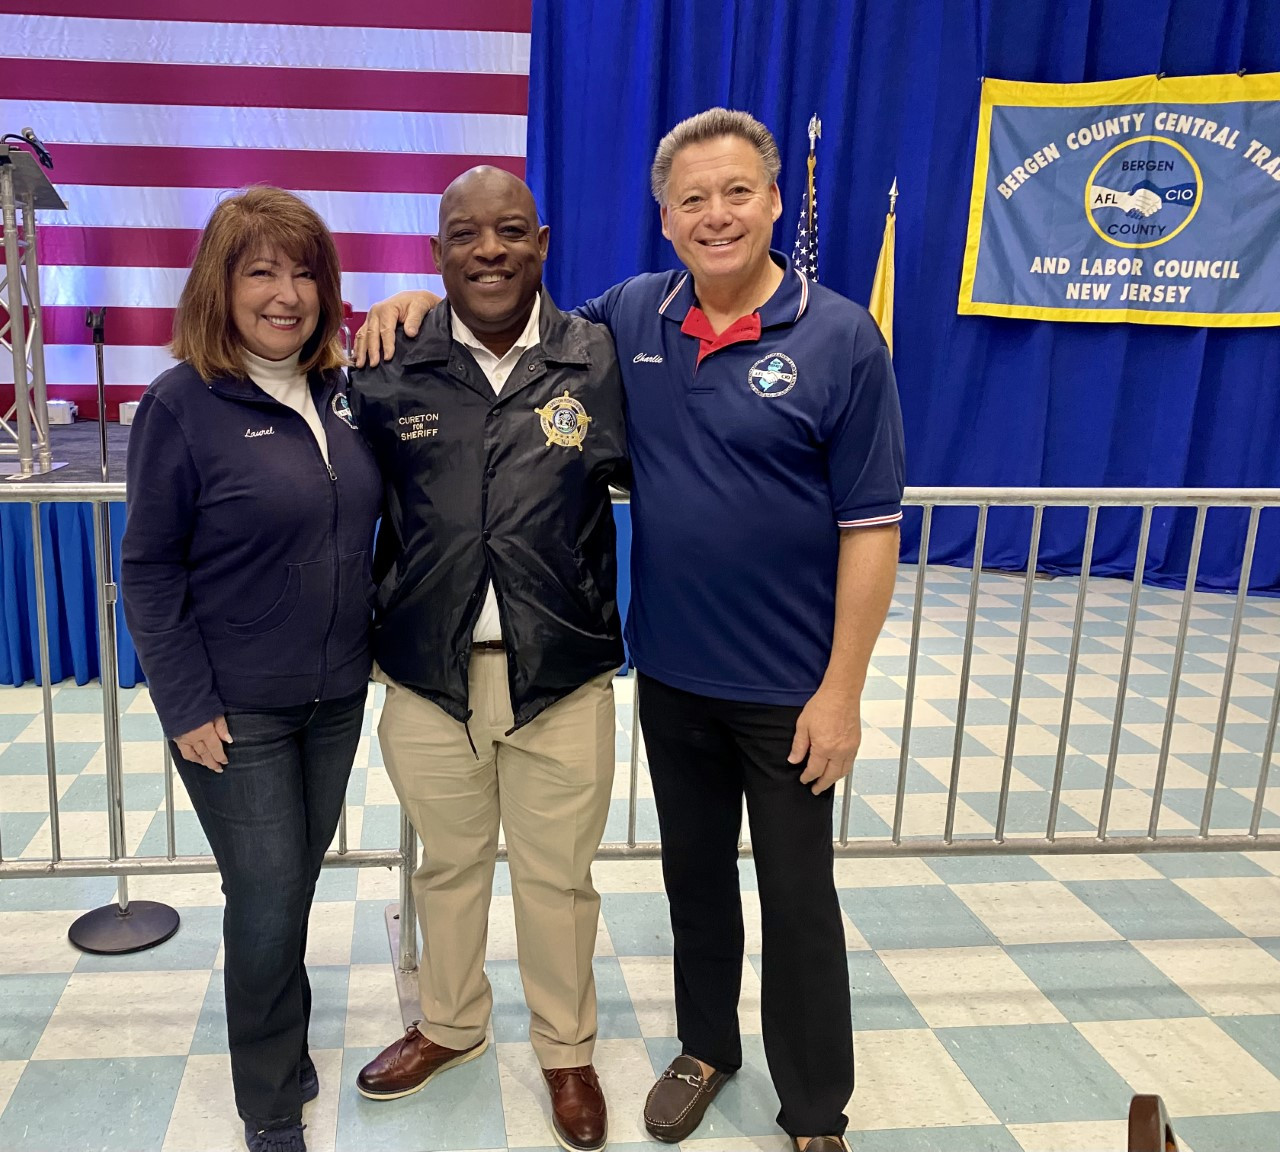 New-Jersey-State-AFL-CIO-President-Charles-Wowkanech-and-New-Jersey-State-AFL-CIO-Secretary-Treasurer-Laurel-Brennan-with-Bergen-County-Sheriff-Anthony-Cureton